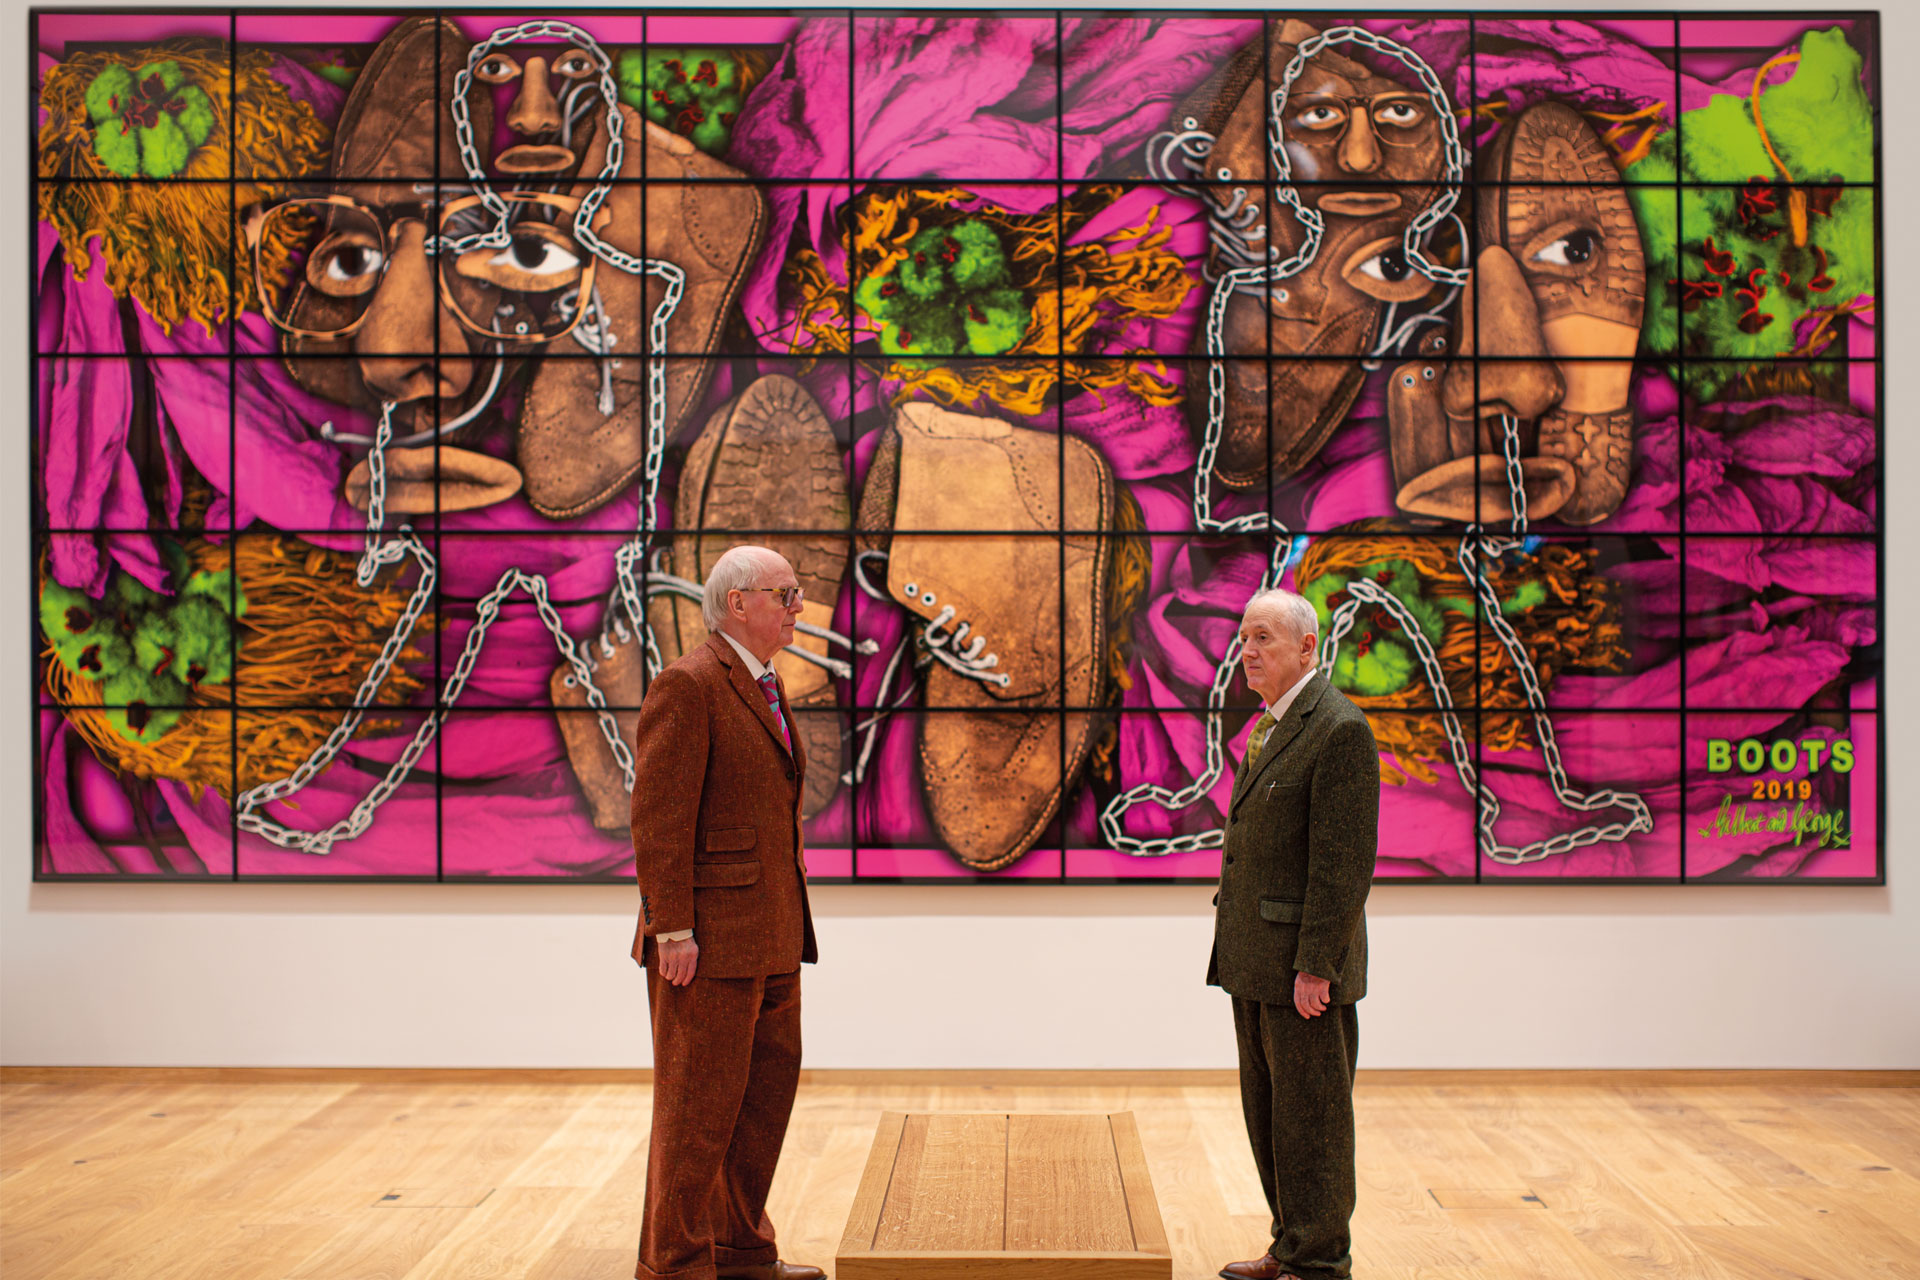 Artists Gilbert and George stand in front of some of their work, which is bright, purple and depicts hidden faces constructed from chains